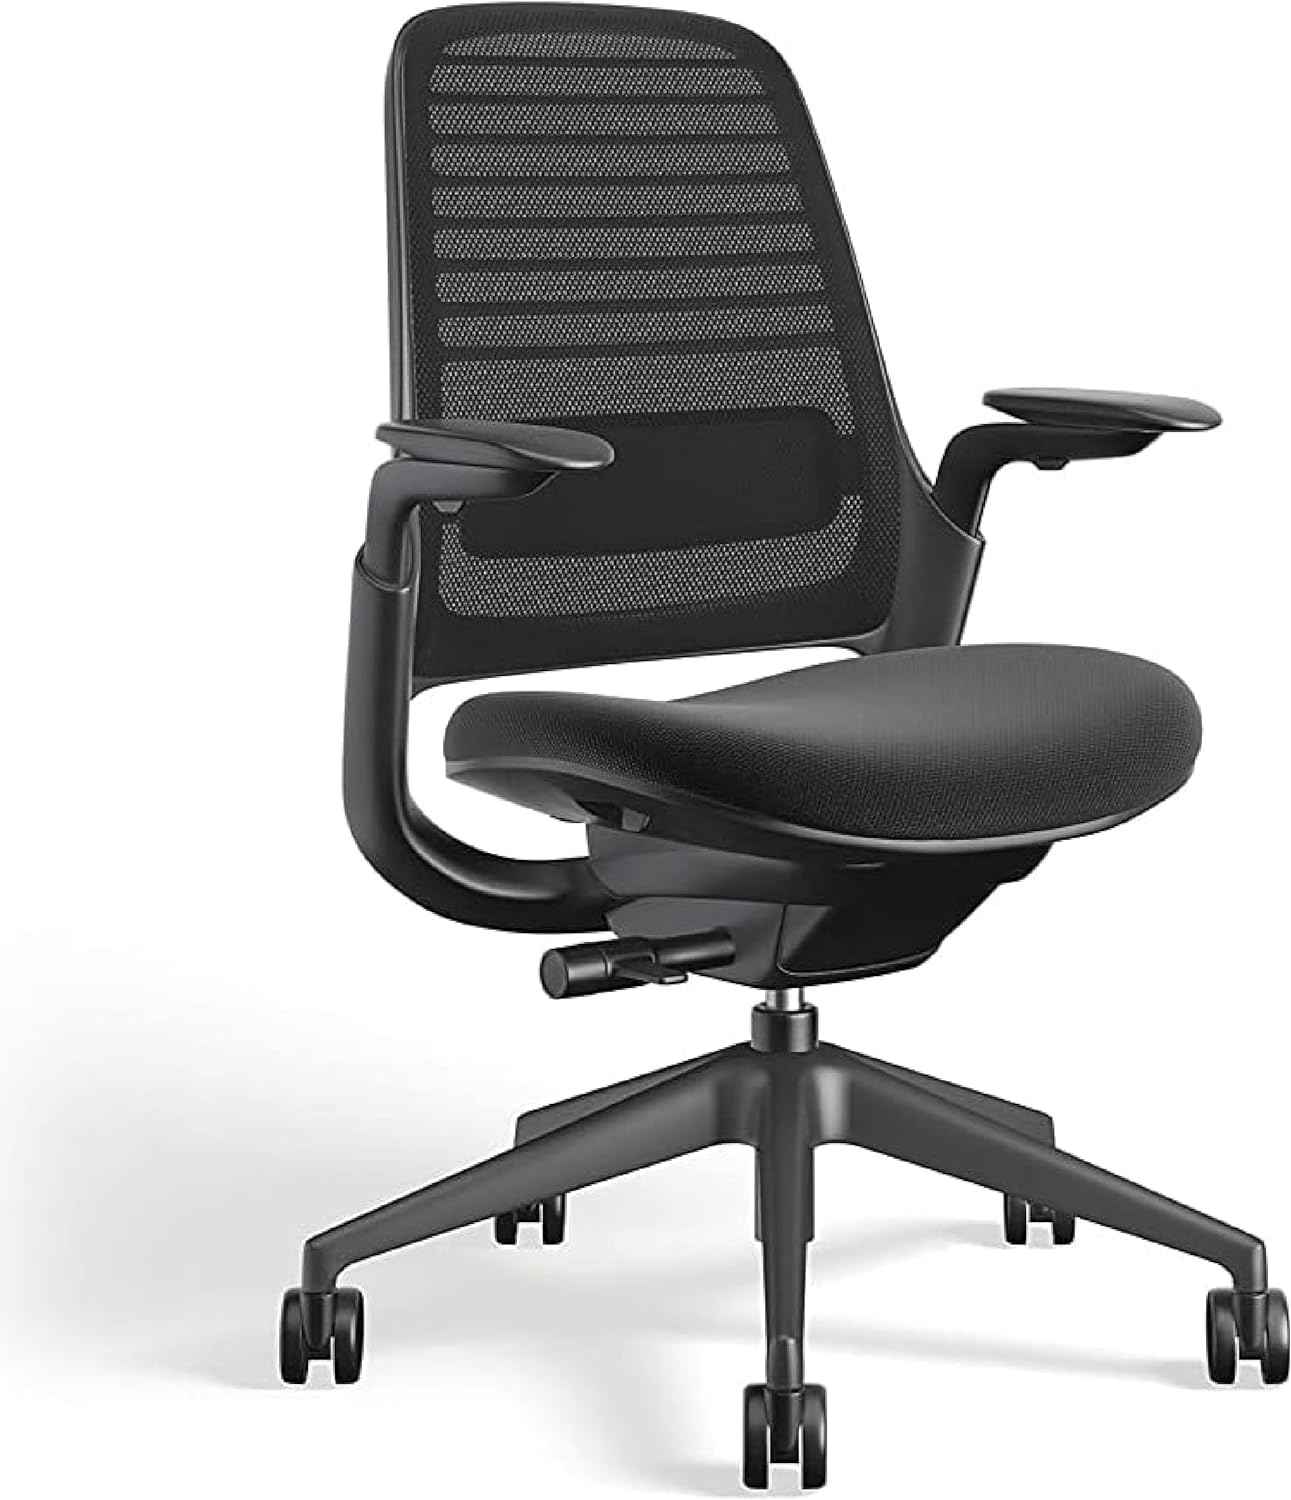 Steelcase Series 1 Office Chair - Ergonomic Work Chair with Wheels for Carpet - Helps Support Productivity - Weight-Activated Controls, Back Supports & Arm Support - Easy Assembly - Licorice